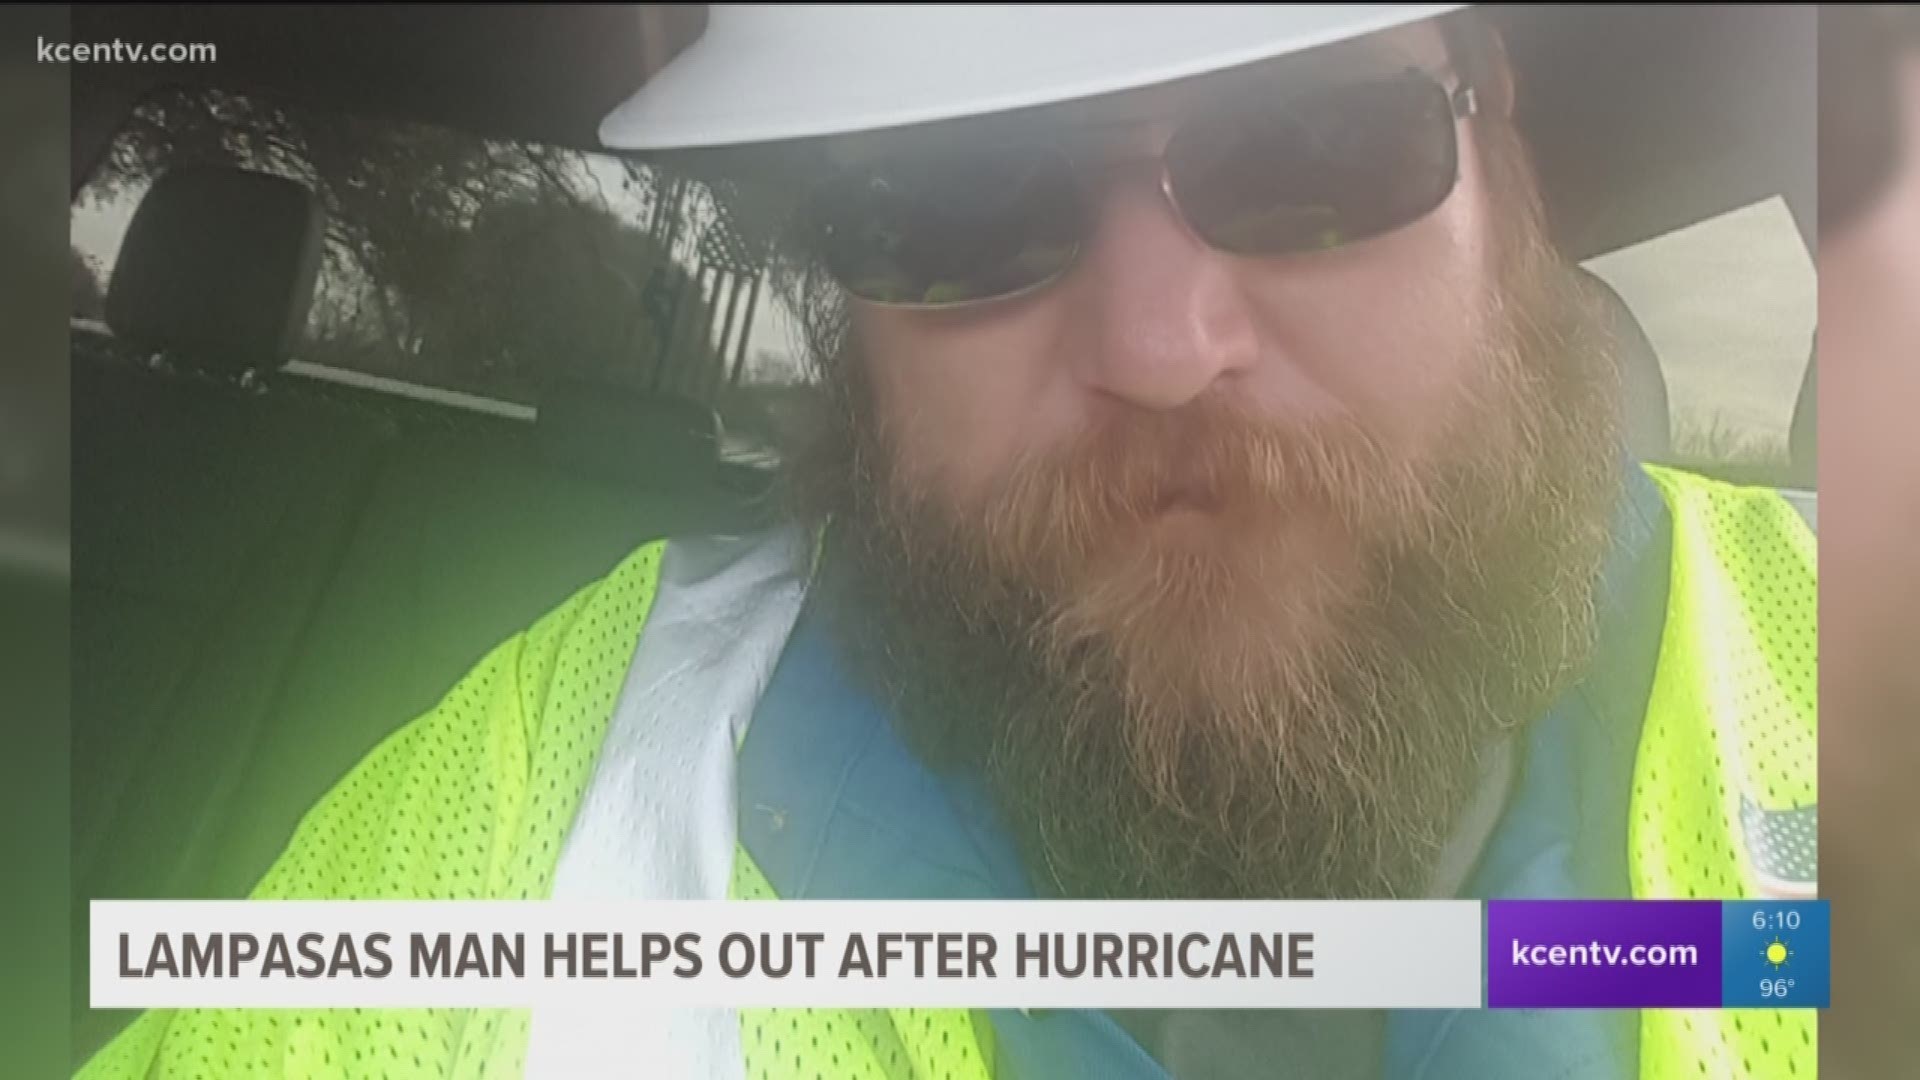 A Lampasas man is on the front lines of the Hurricane Florence relief efforts, putting himself in danger to help people on the coast get their power back.